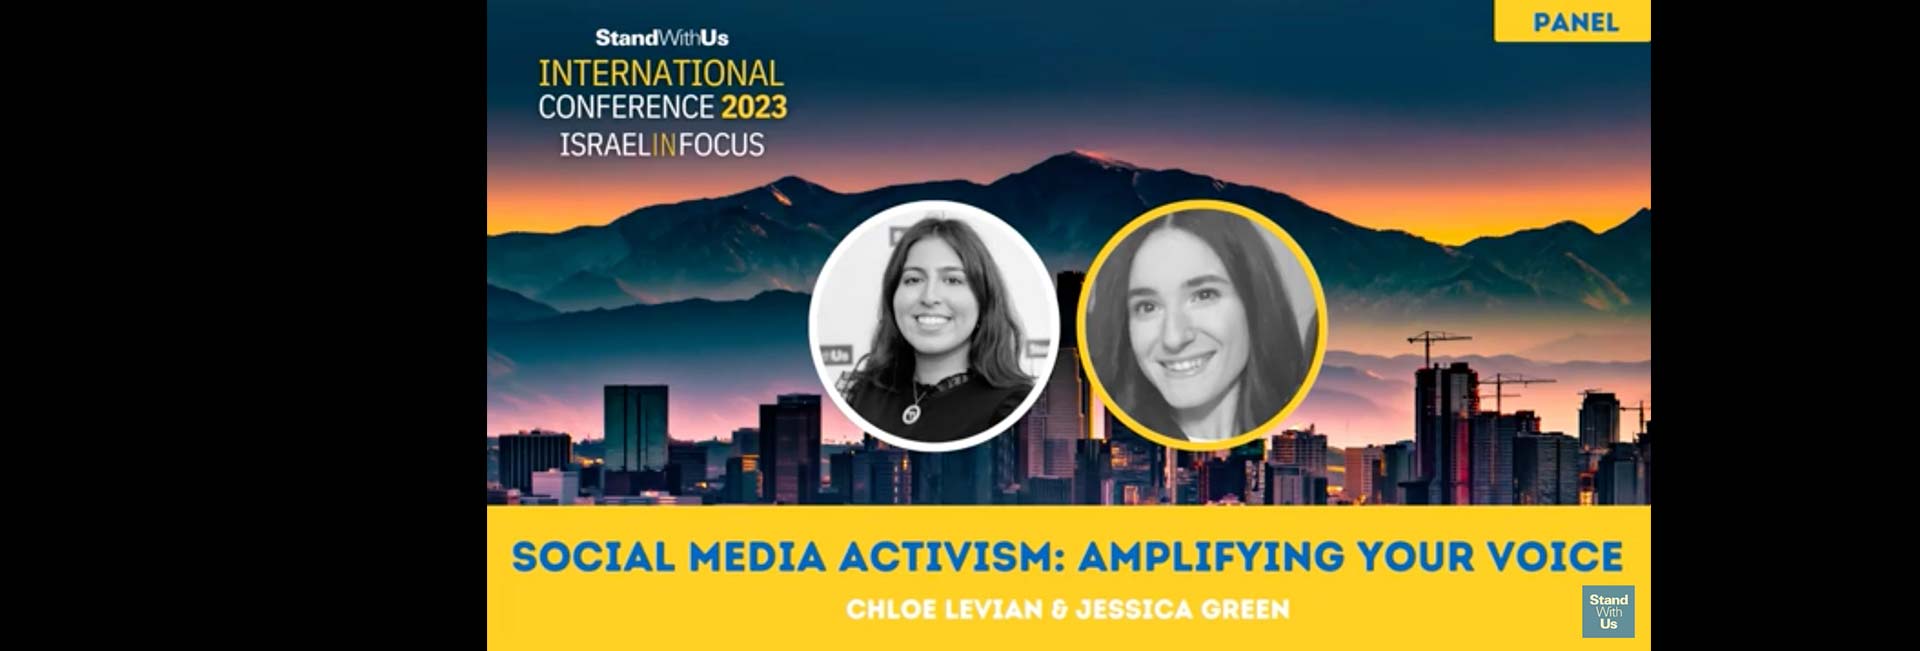 StandWithUs International Conference 2023: Social Media Activism — Amplifying Your Voice